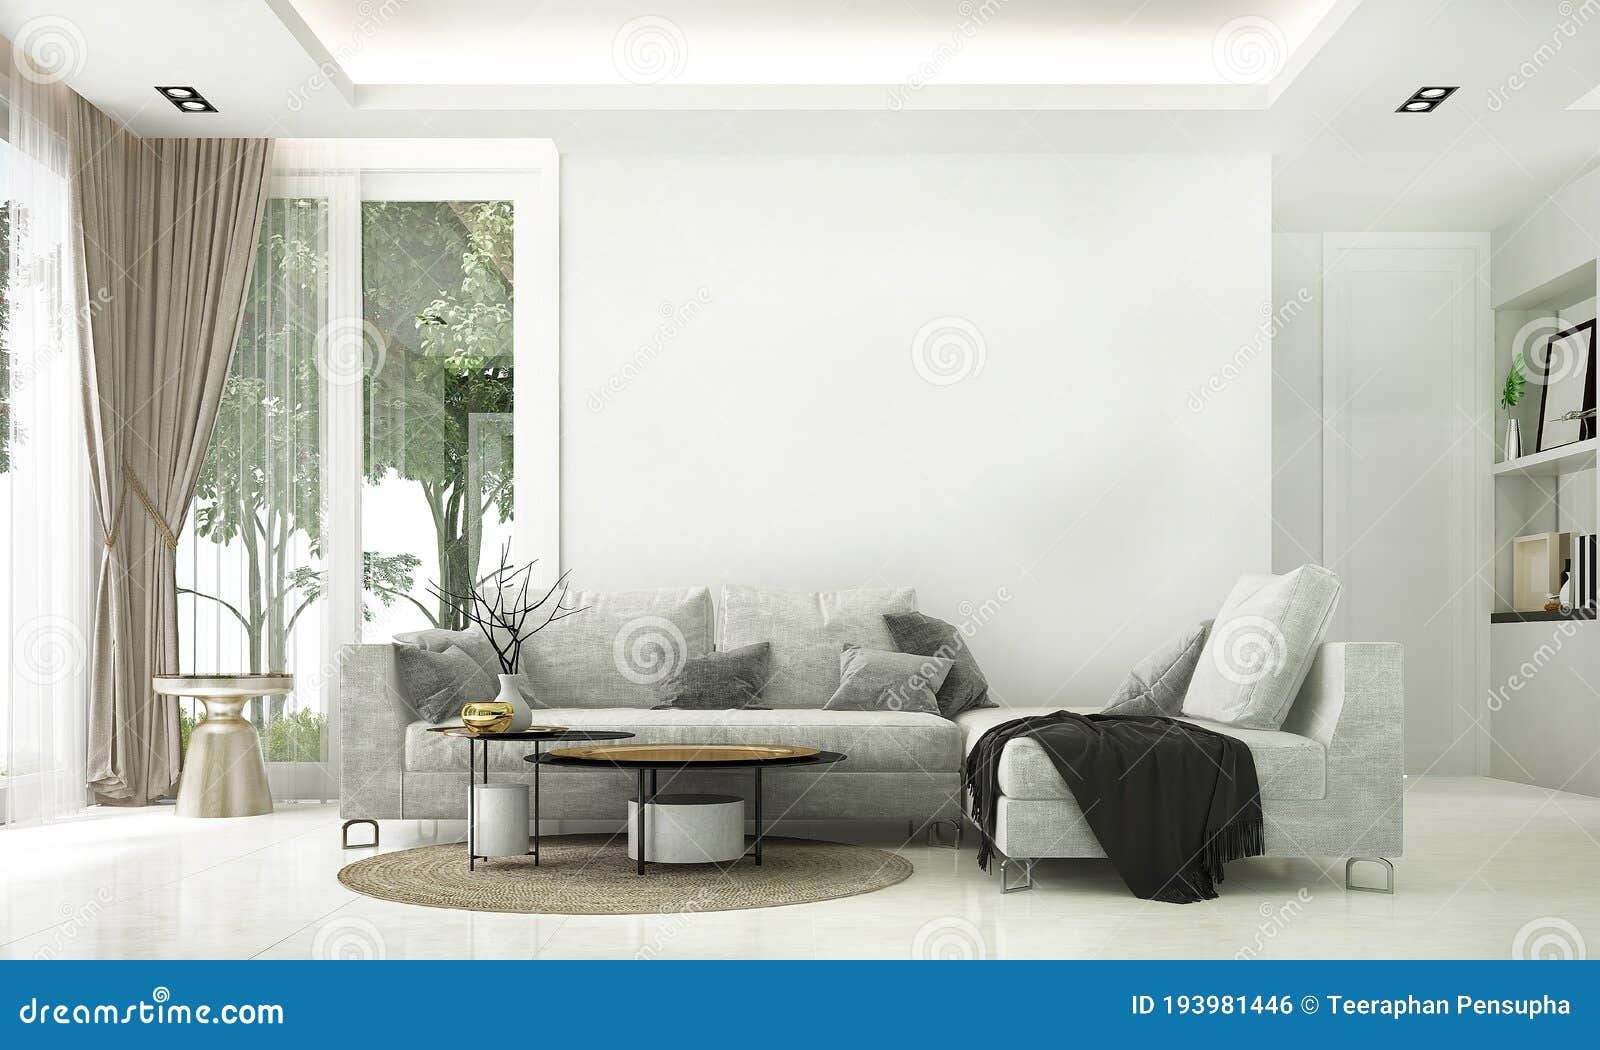 The Beautiful Mock Up Interior Design of Modern Lounge and Living Room  White Wall Background Stock Illustration - Illustration of dining, livig:  193981446